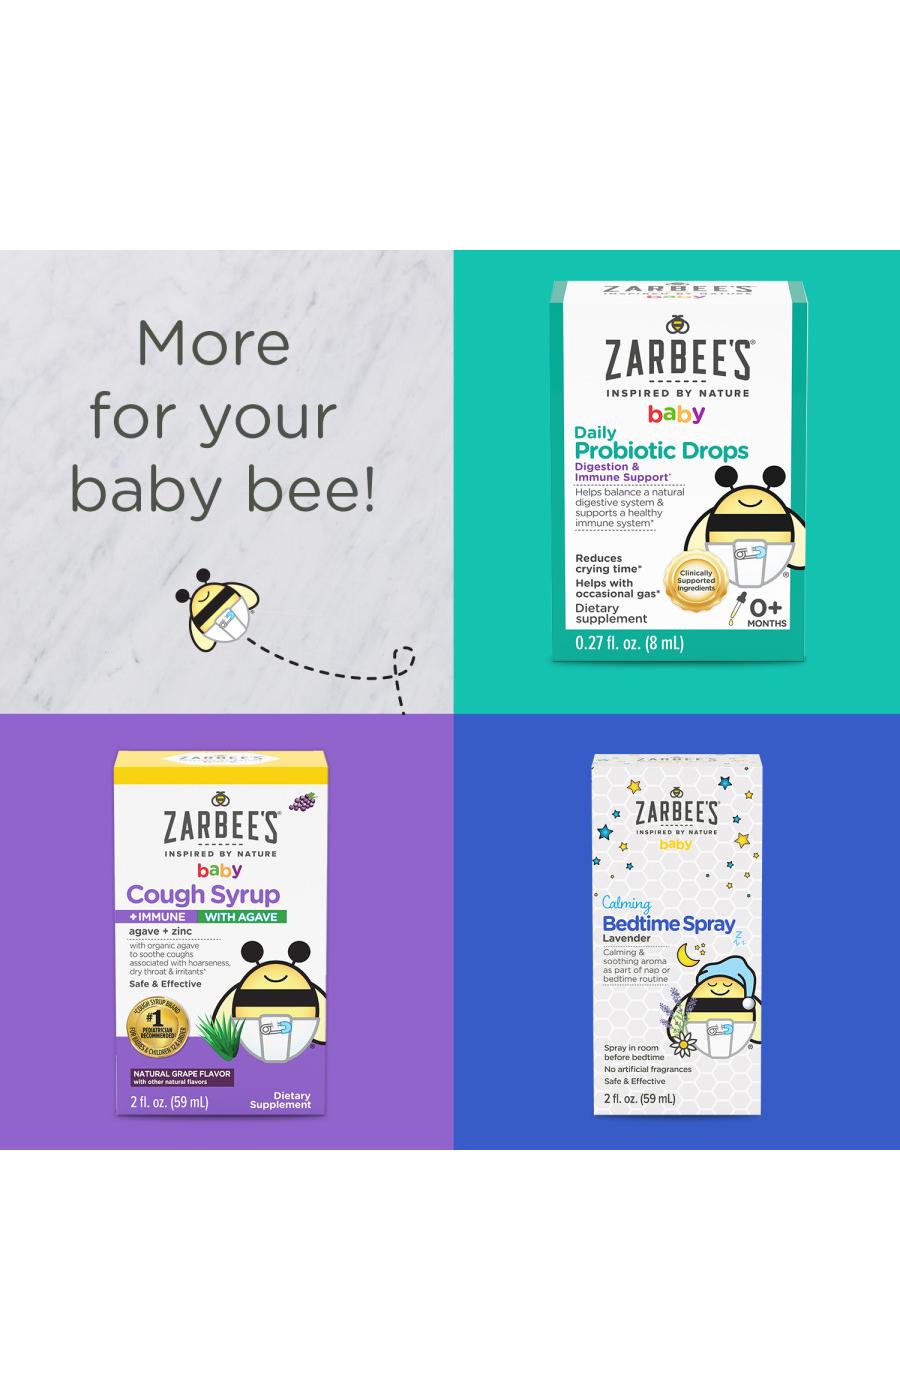 Zarbee's Baby Calming Massage Oil, Lavender & Chamomile; image 6 of 7